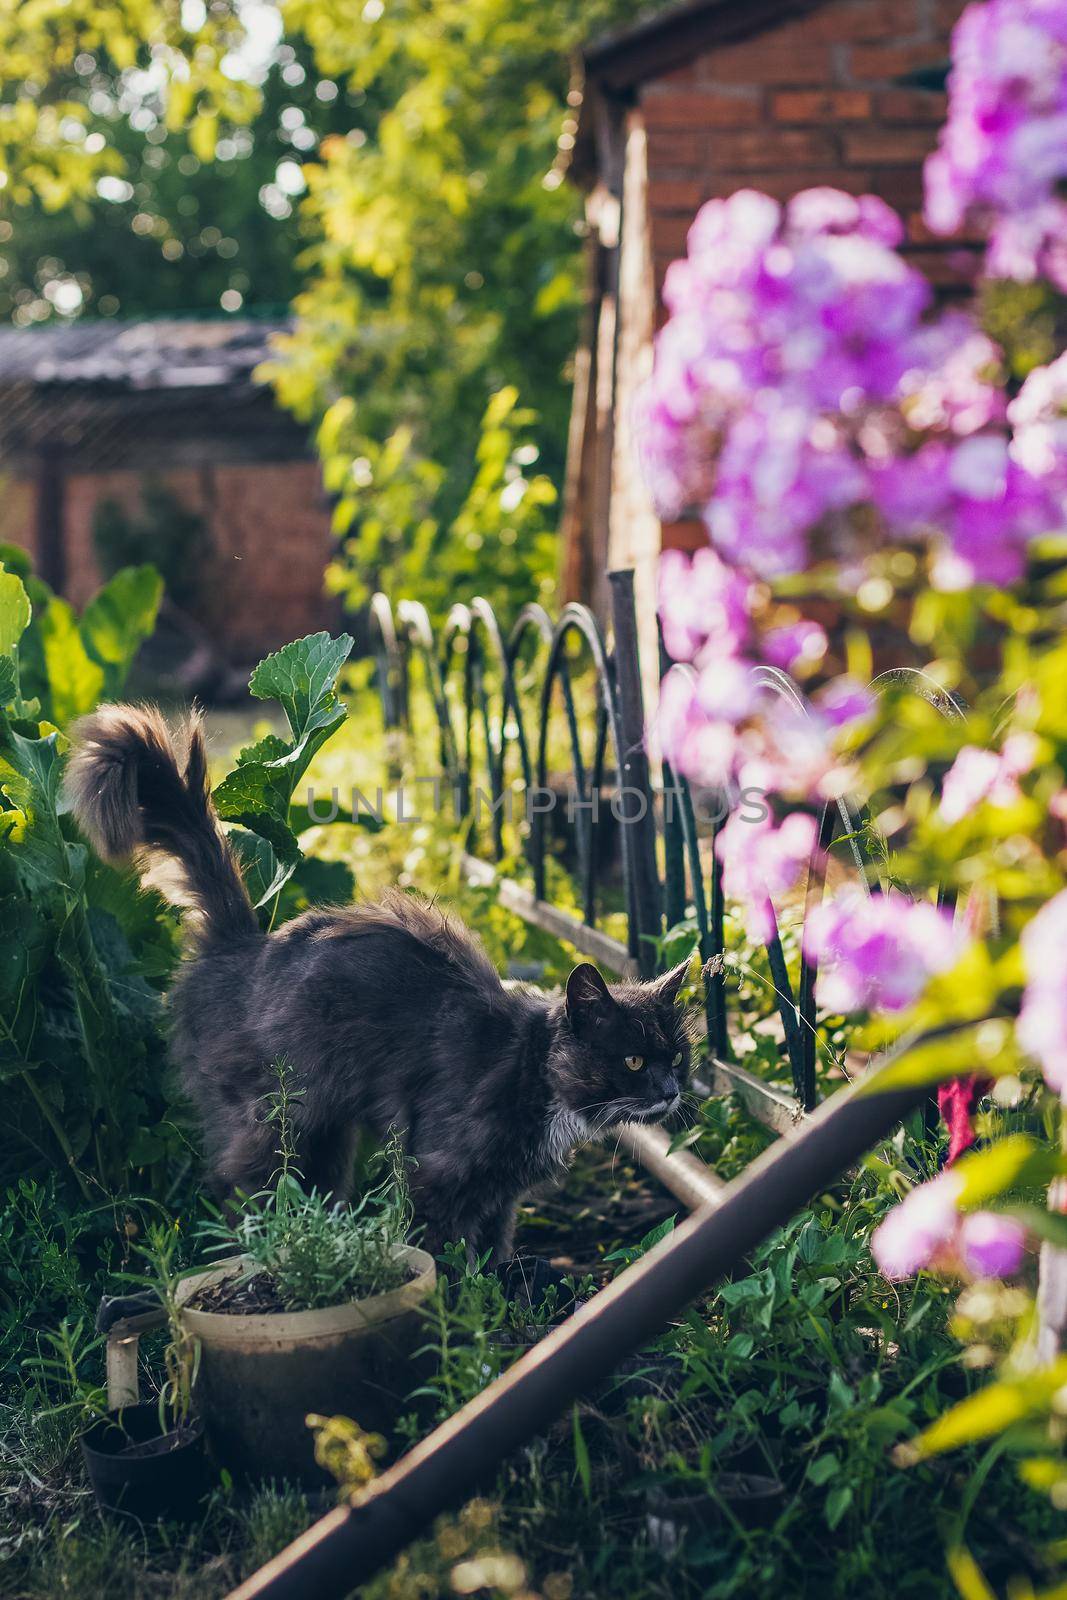 Summer background with a grey cat walking in the garden and flowers.